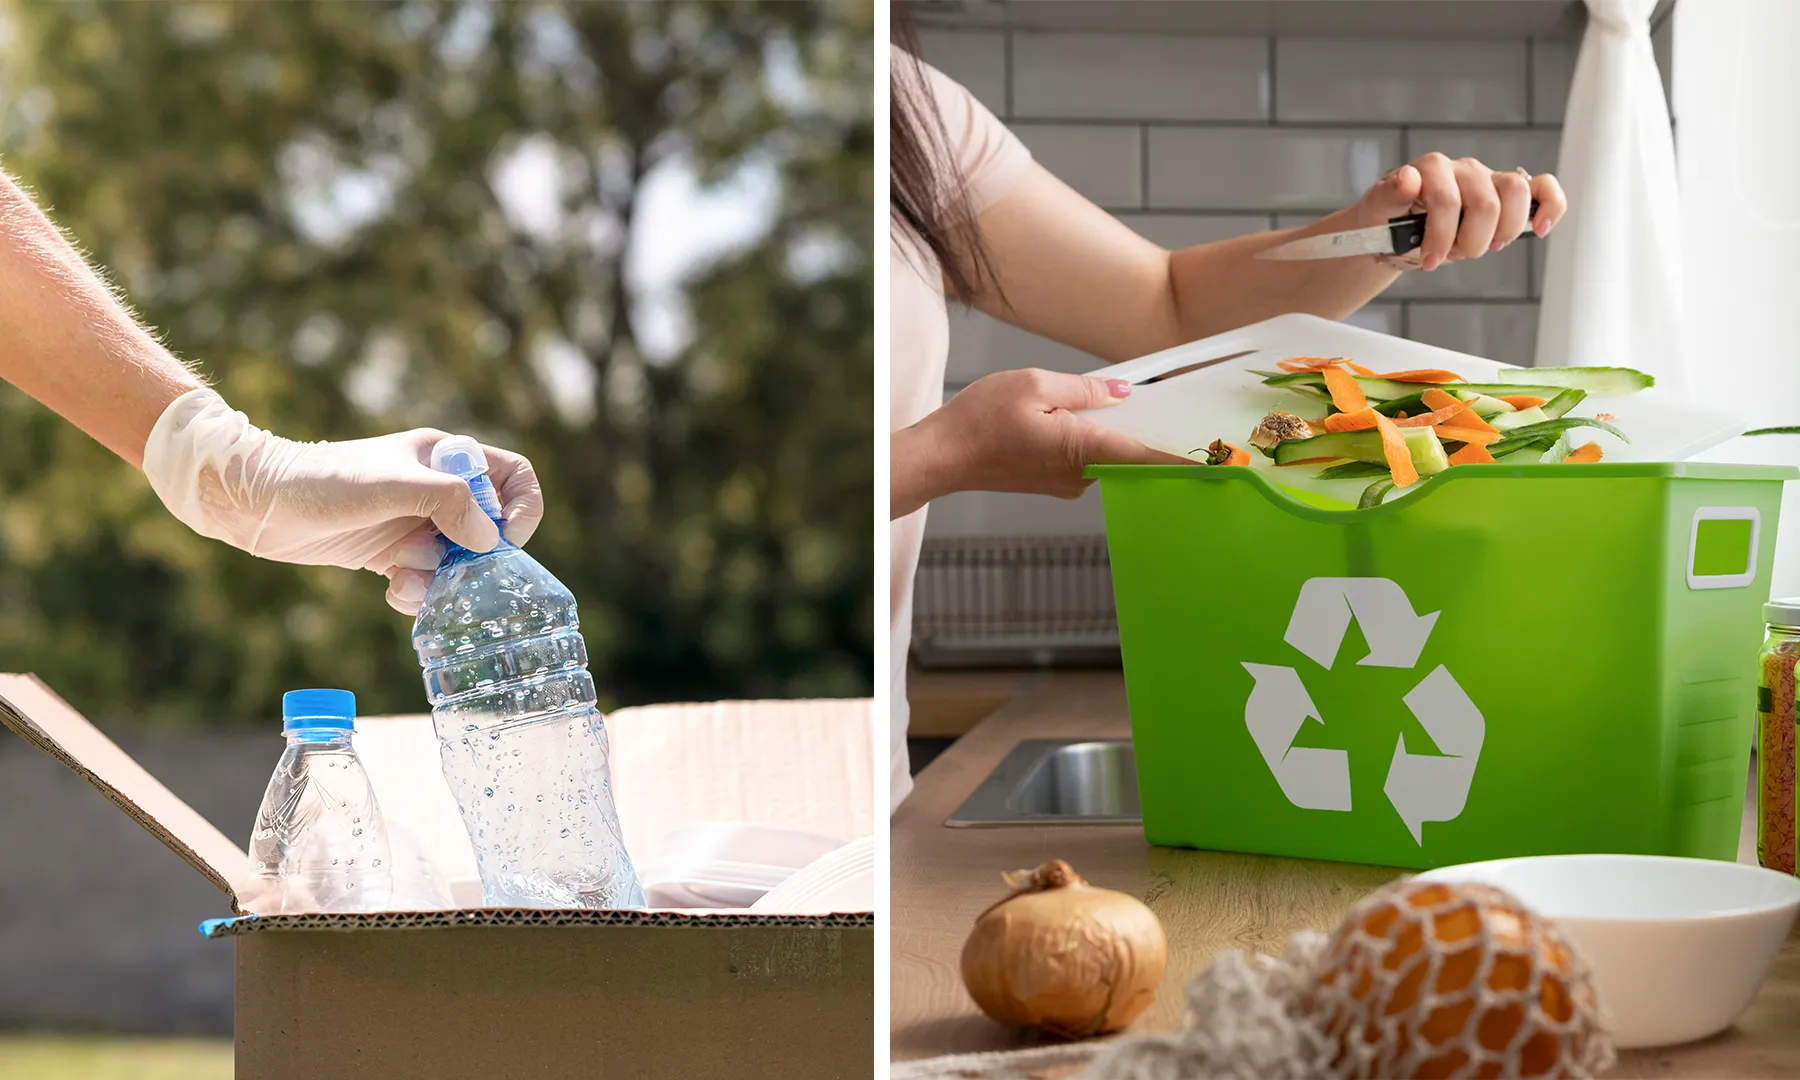 How to Recycle Properly at Home